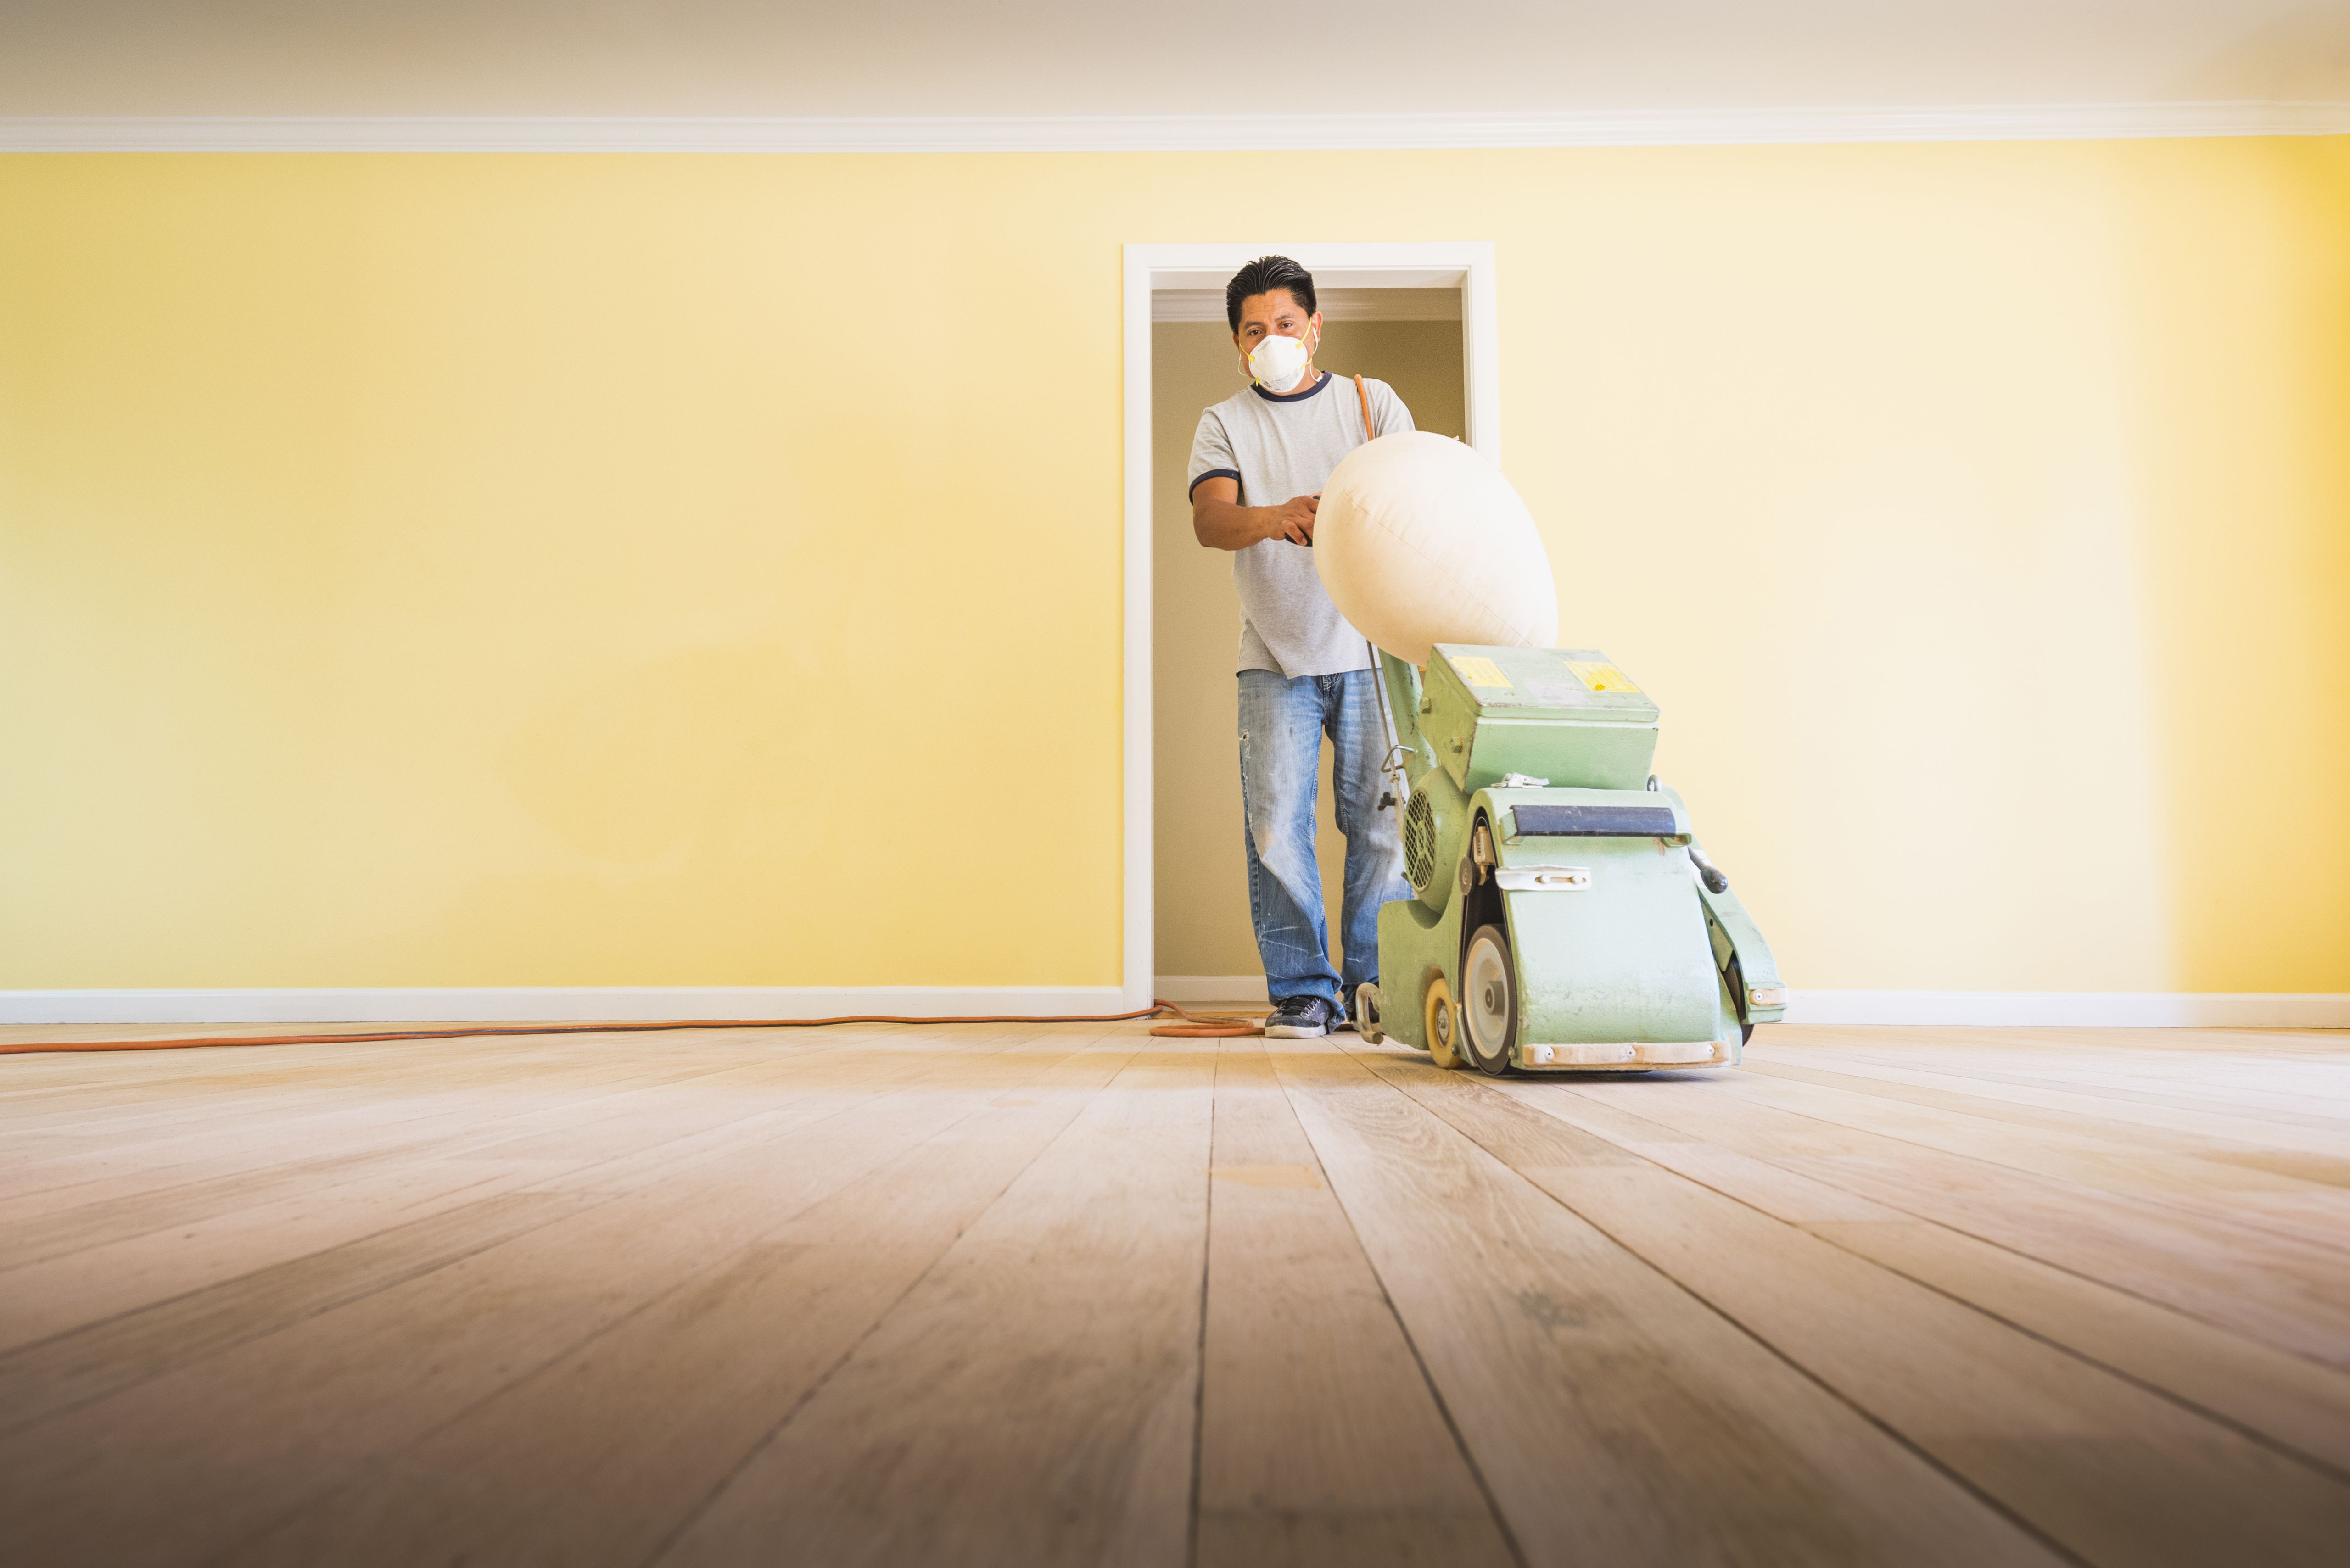 28 Recommended Hardwood Floor Care after Refinishing 2024 free download hardwood floor care after refinishing of should you paint walls or refinish floors first intended for floorsandingafterpainting 5a8f08dfae9ab80037d9d878